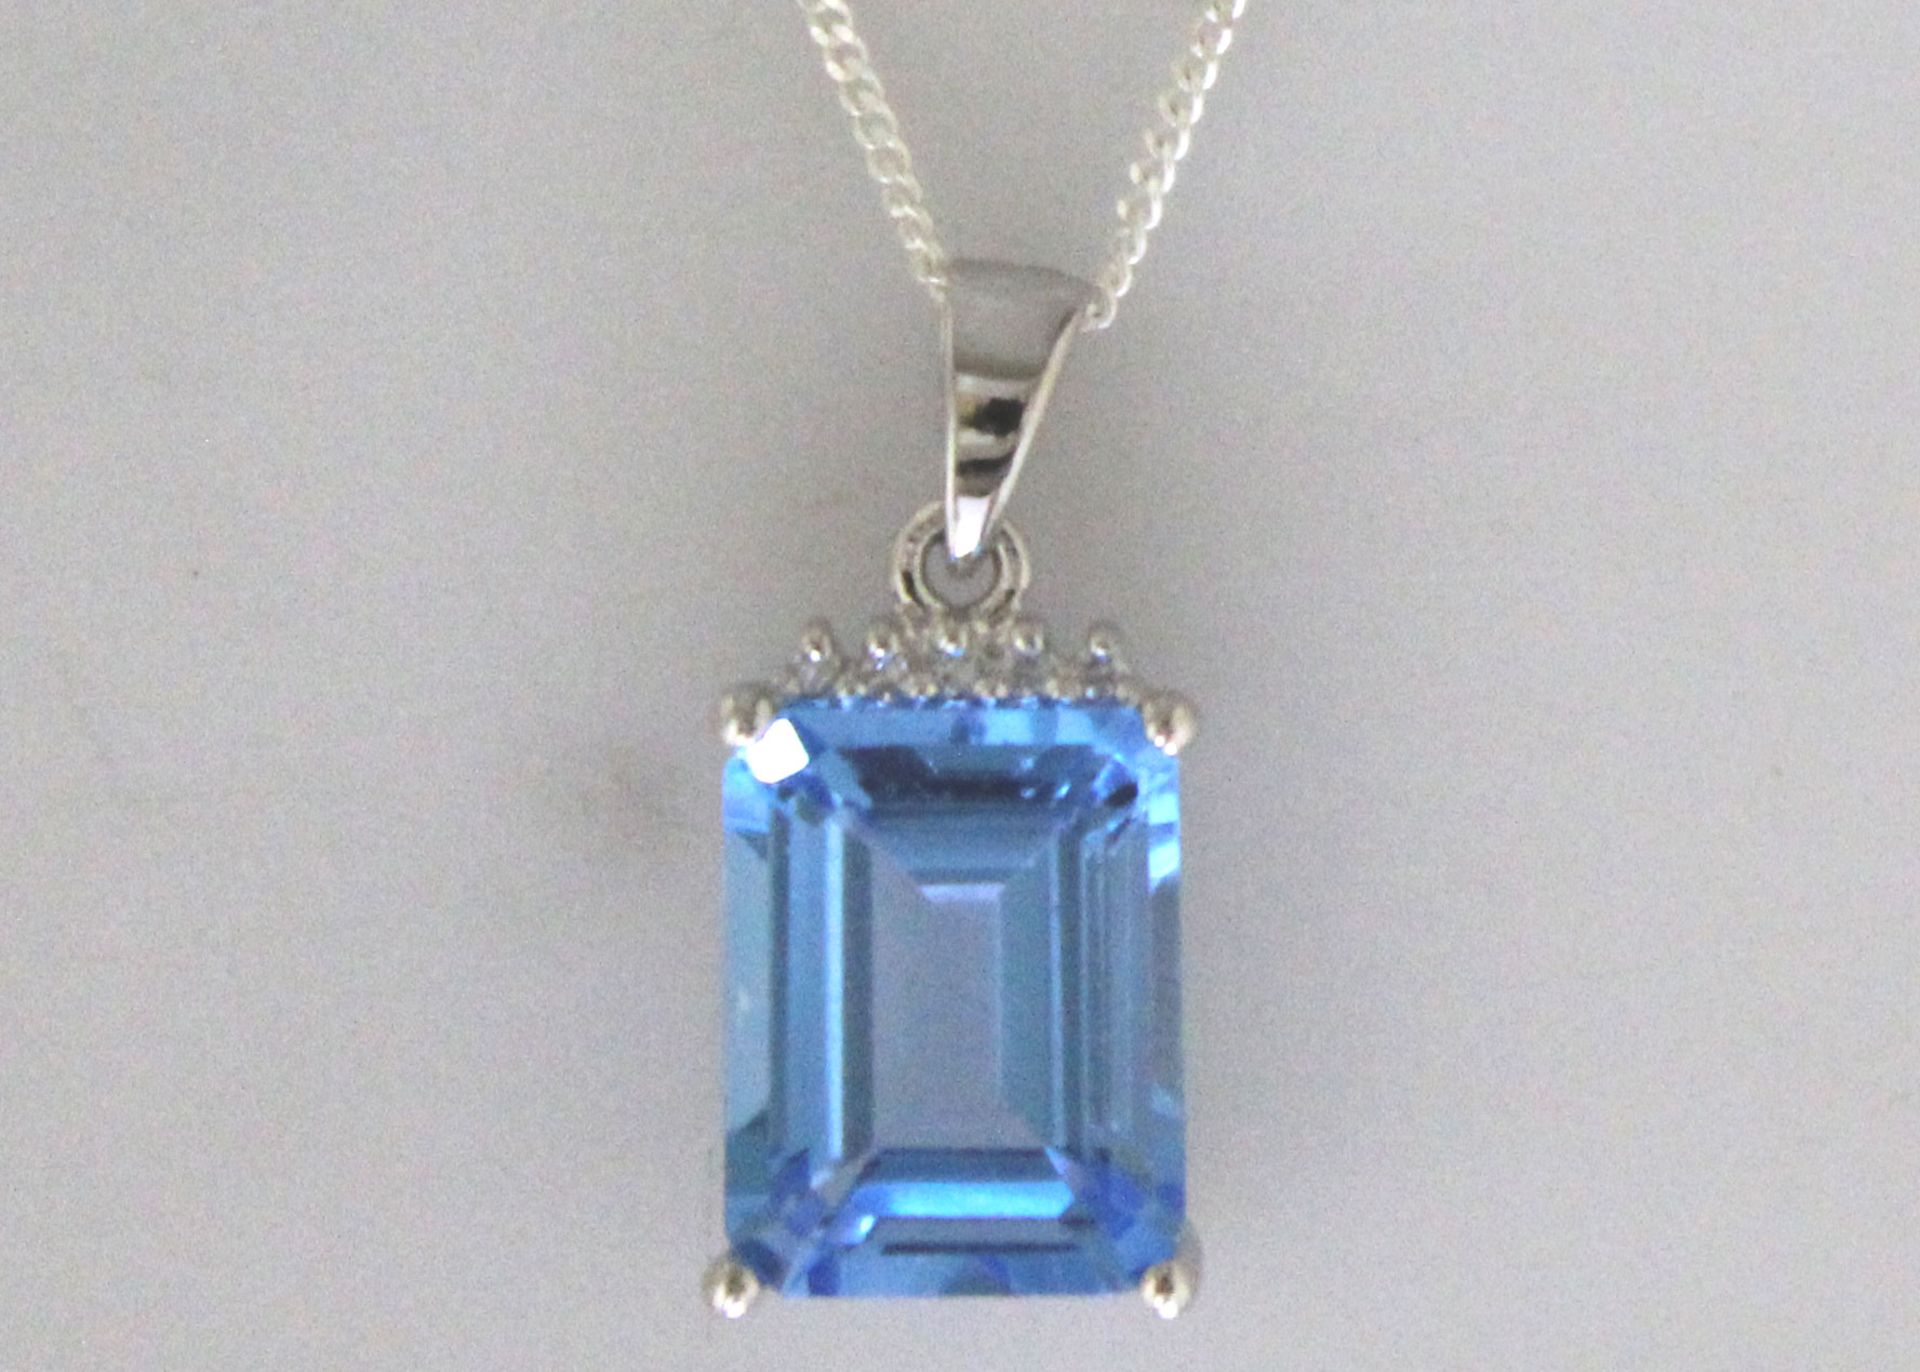 9ct White Gold Diamond And Blue Topaz Pendant (T3.76) 0.01 Carats - Image 2 of 6